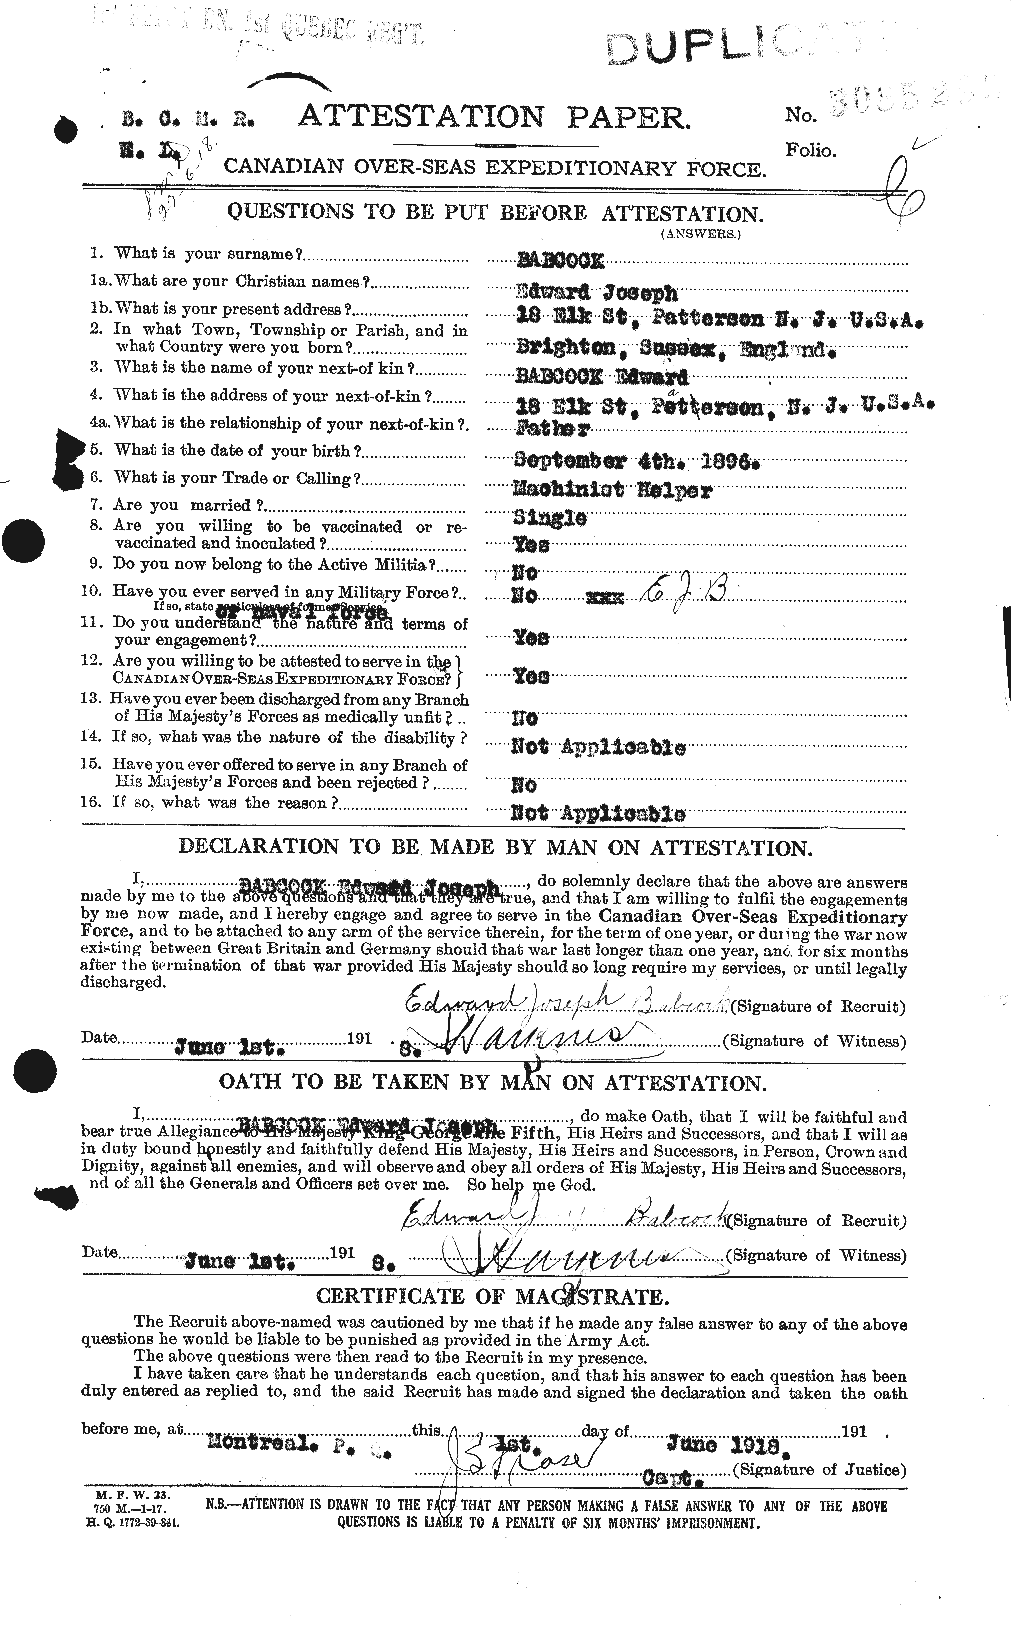 Personnel Records of the First World War - CEF 218248a